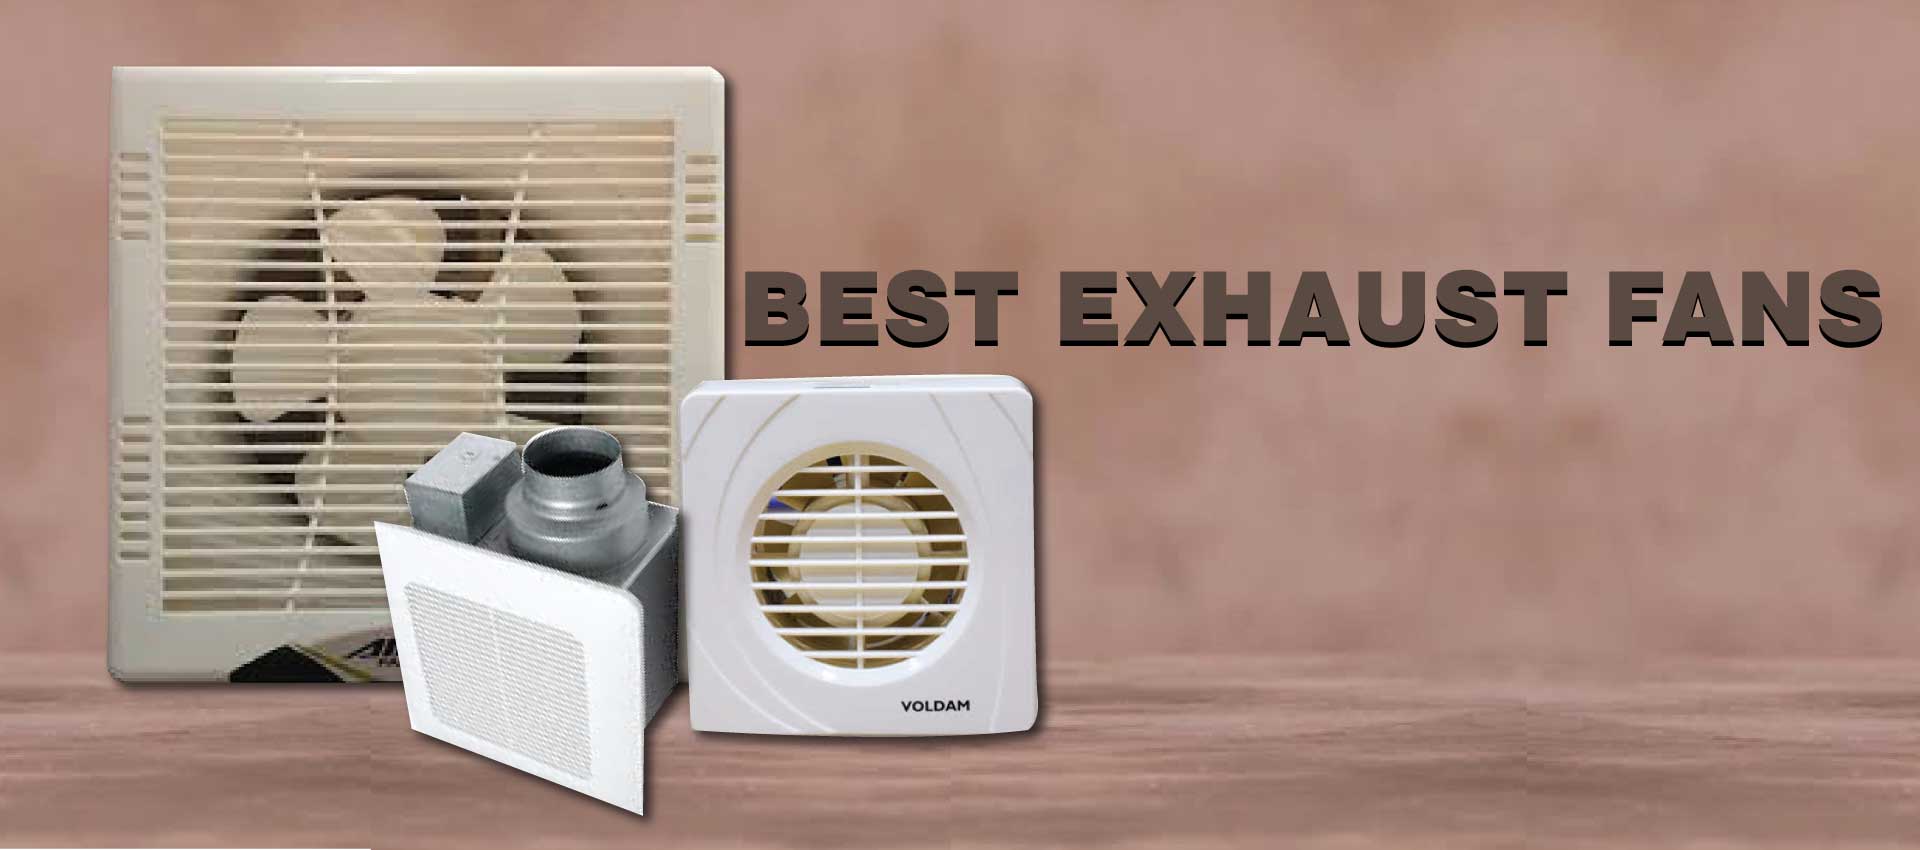 Exhaust Fans in Pakistan - Latest products of 2020